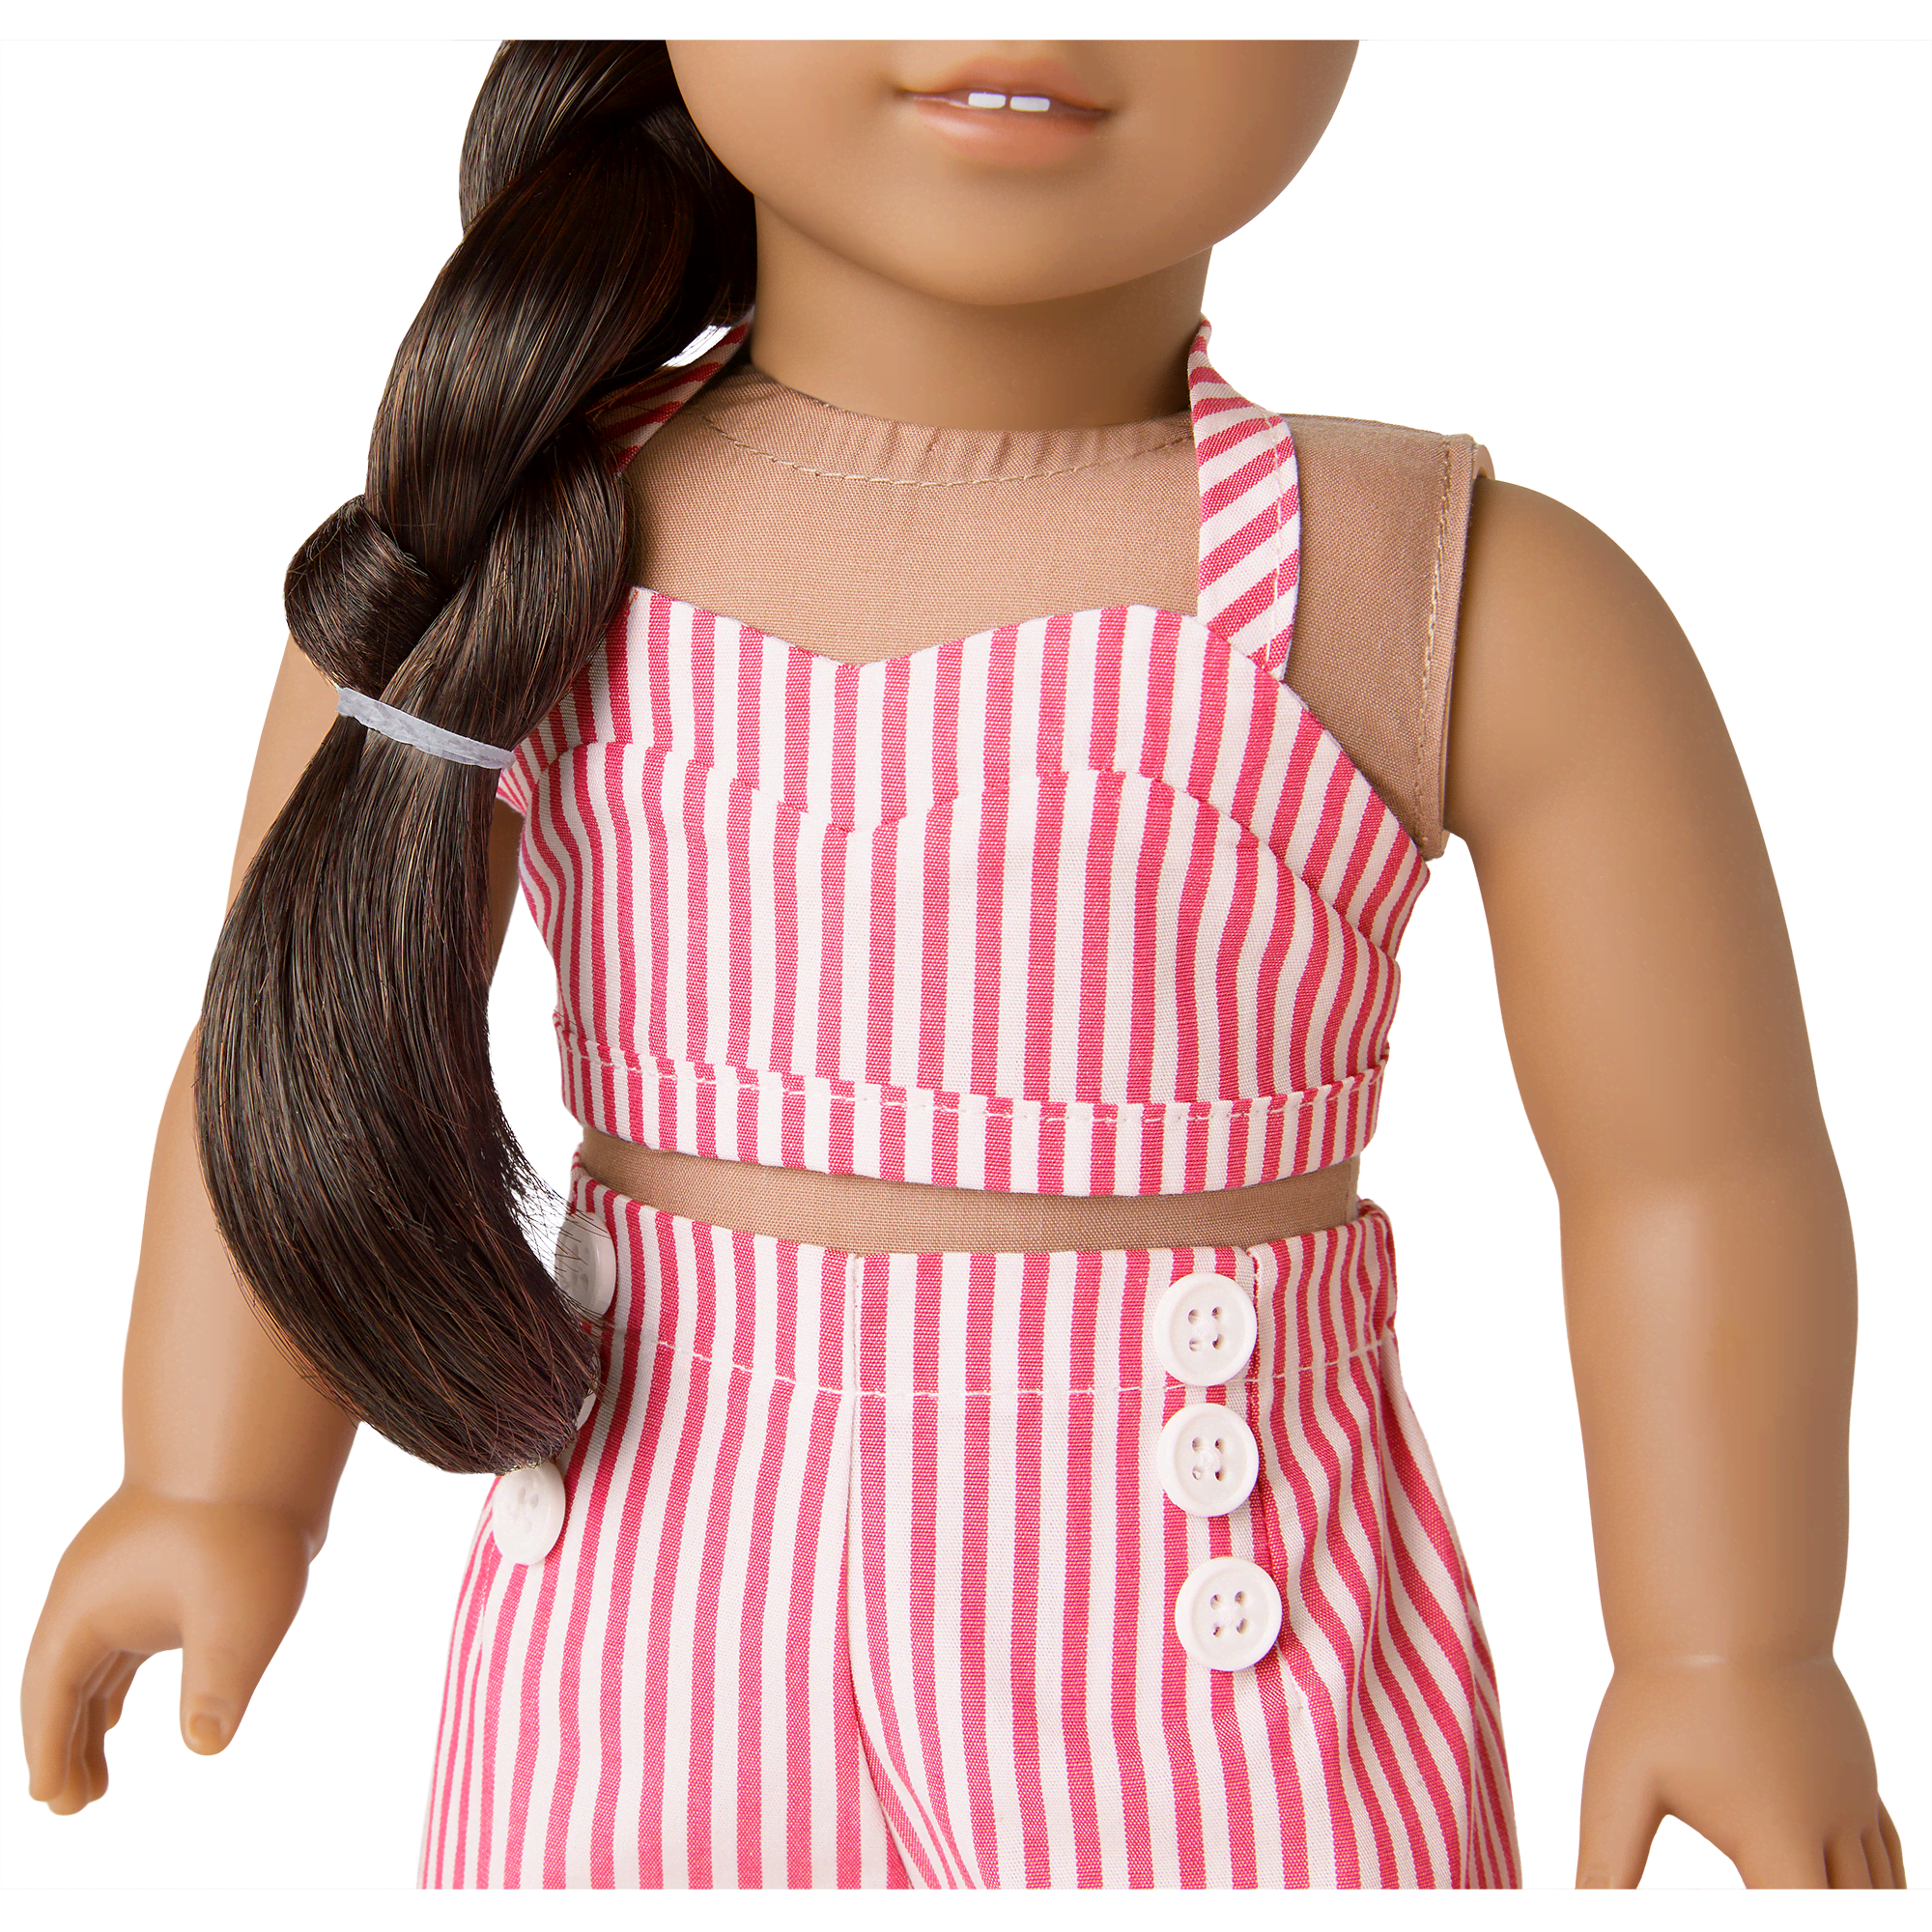 Nanea’s™ Two-Piece Swimsuit for 18-inch Dolls